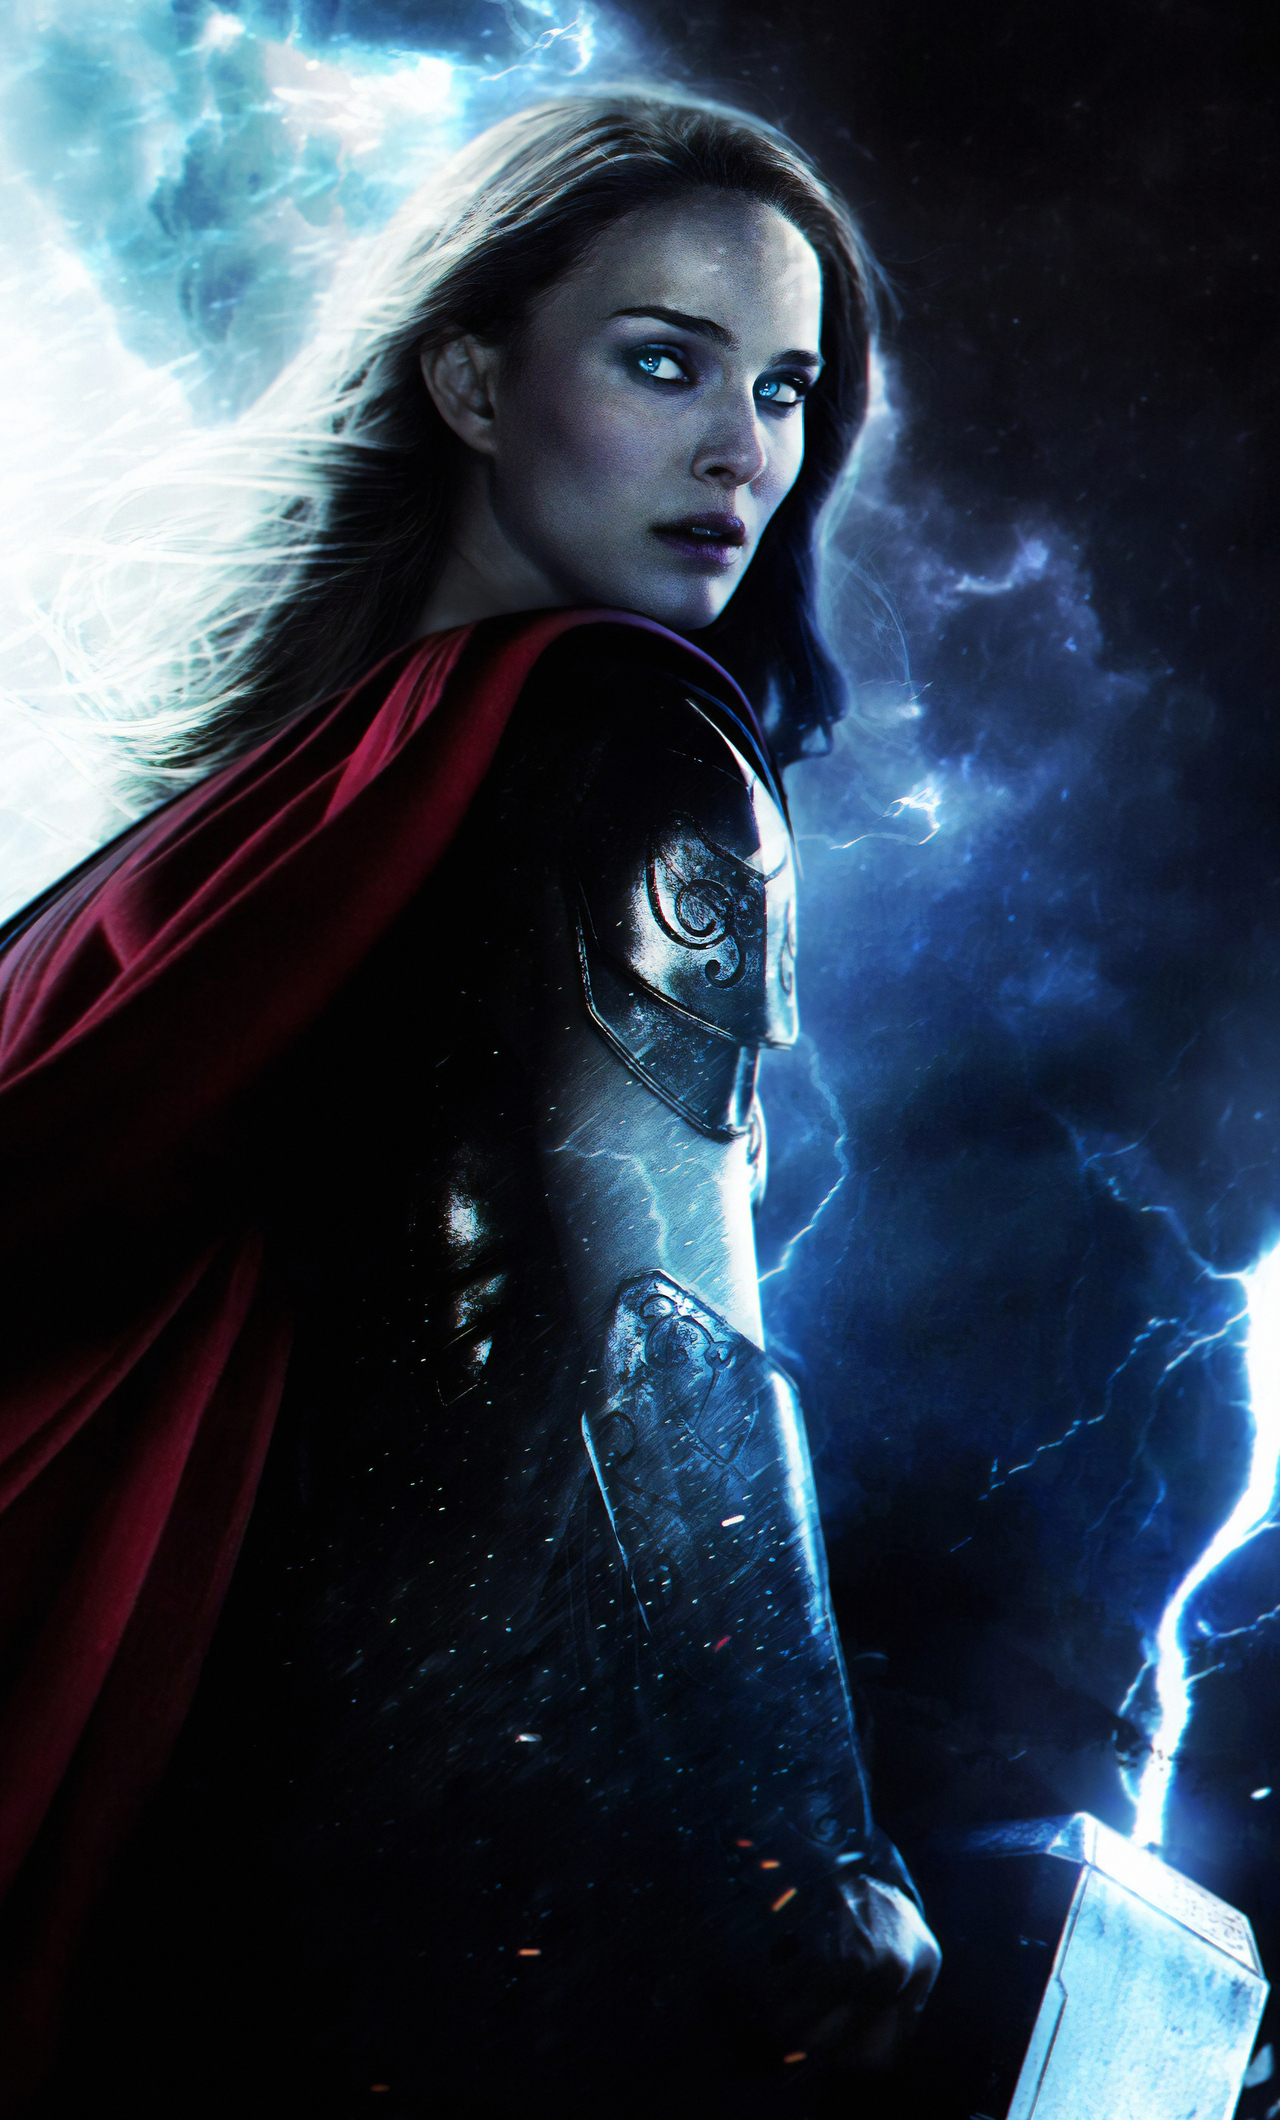 thor love and thunder